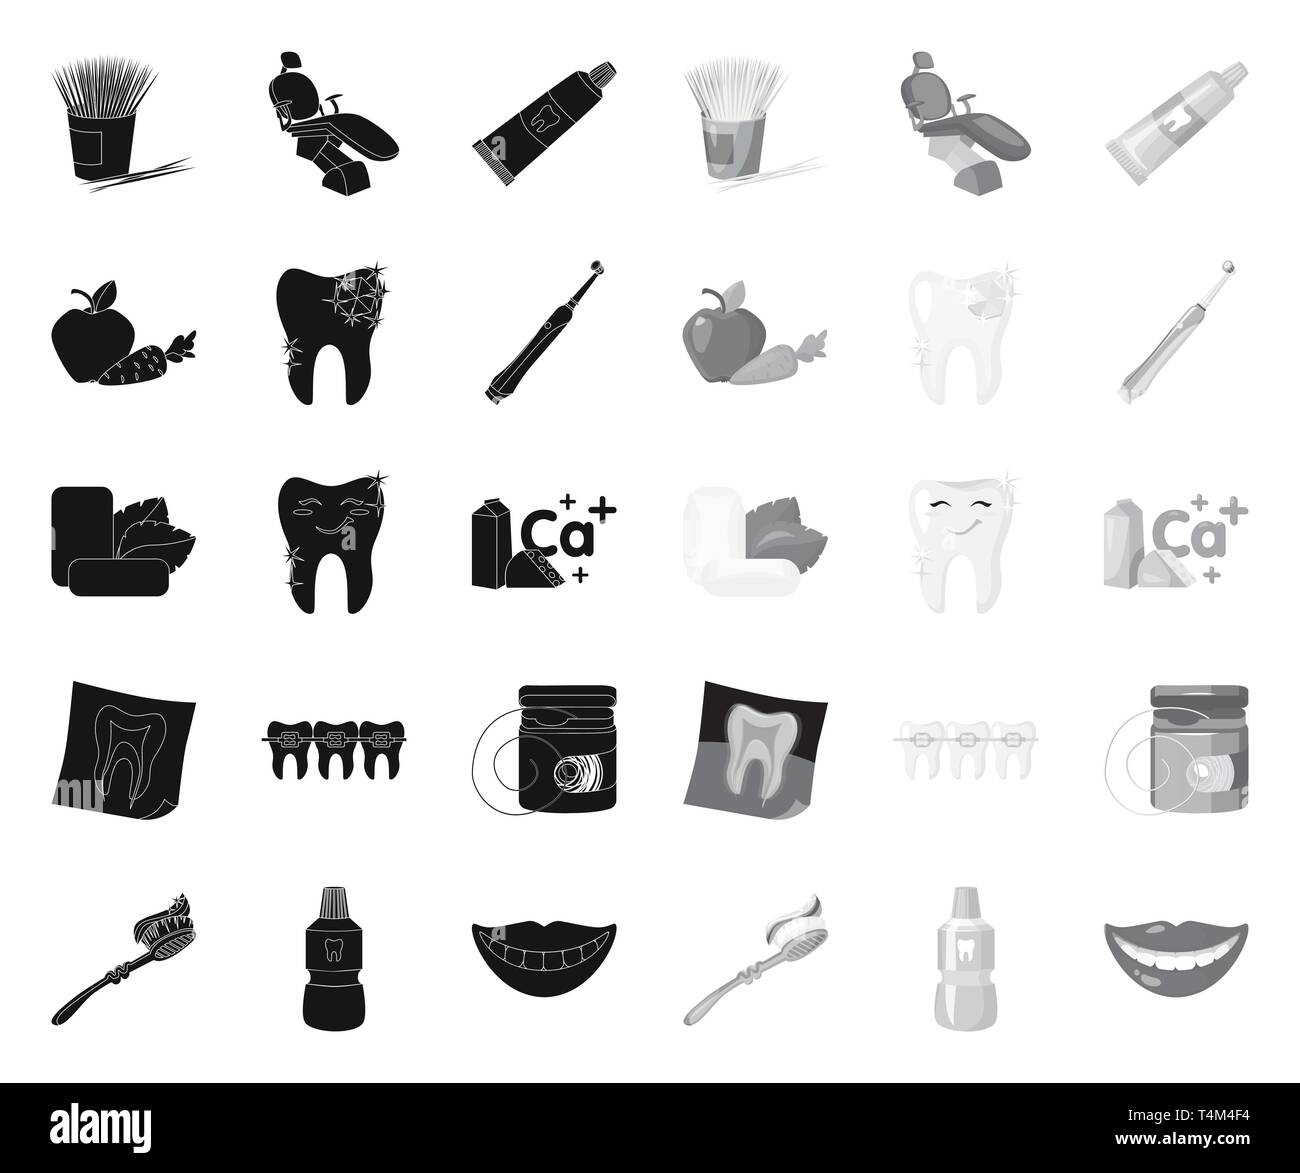 adaptation,apple,art,black.mono,bottle,braces,calcium,care,carrot,chair,chewing,clinic,collection,dental,dentist,dentistry,design,diamond,doctor,electric,equipment,floss,gum,hygiene,icon,illustration,instrument,isolated,logo,medicine,mouthwash,ray,set,sign,smile,smiling,sources,symbol,teeth,tooth,toothbrush,toothpaste,toothpick,treatment,vector,web,white,x Vector Vectors , Stock Vector